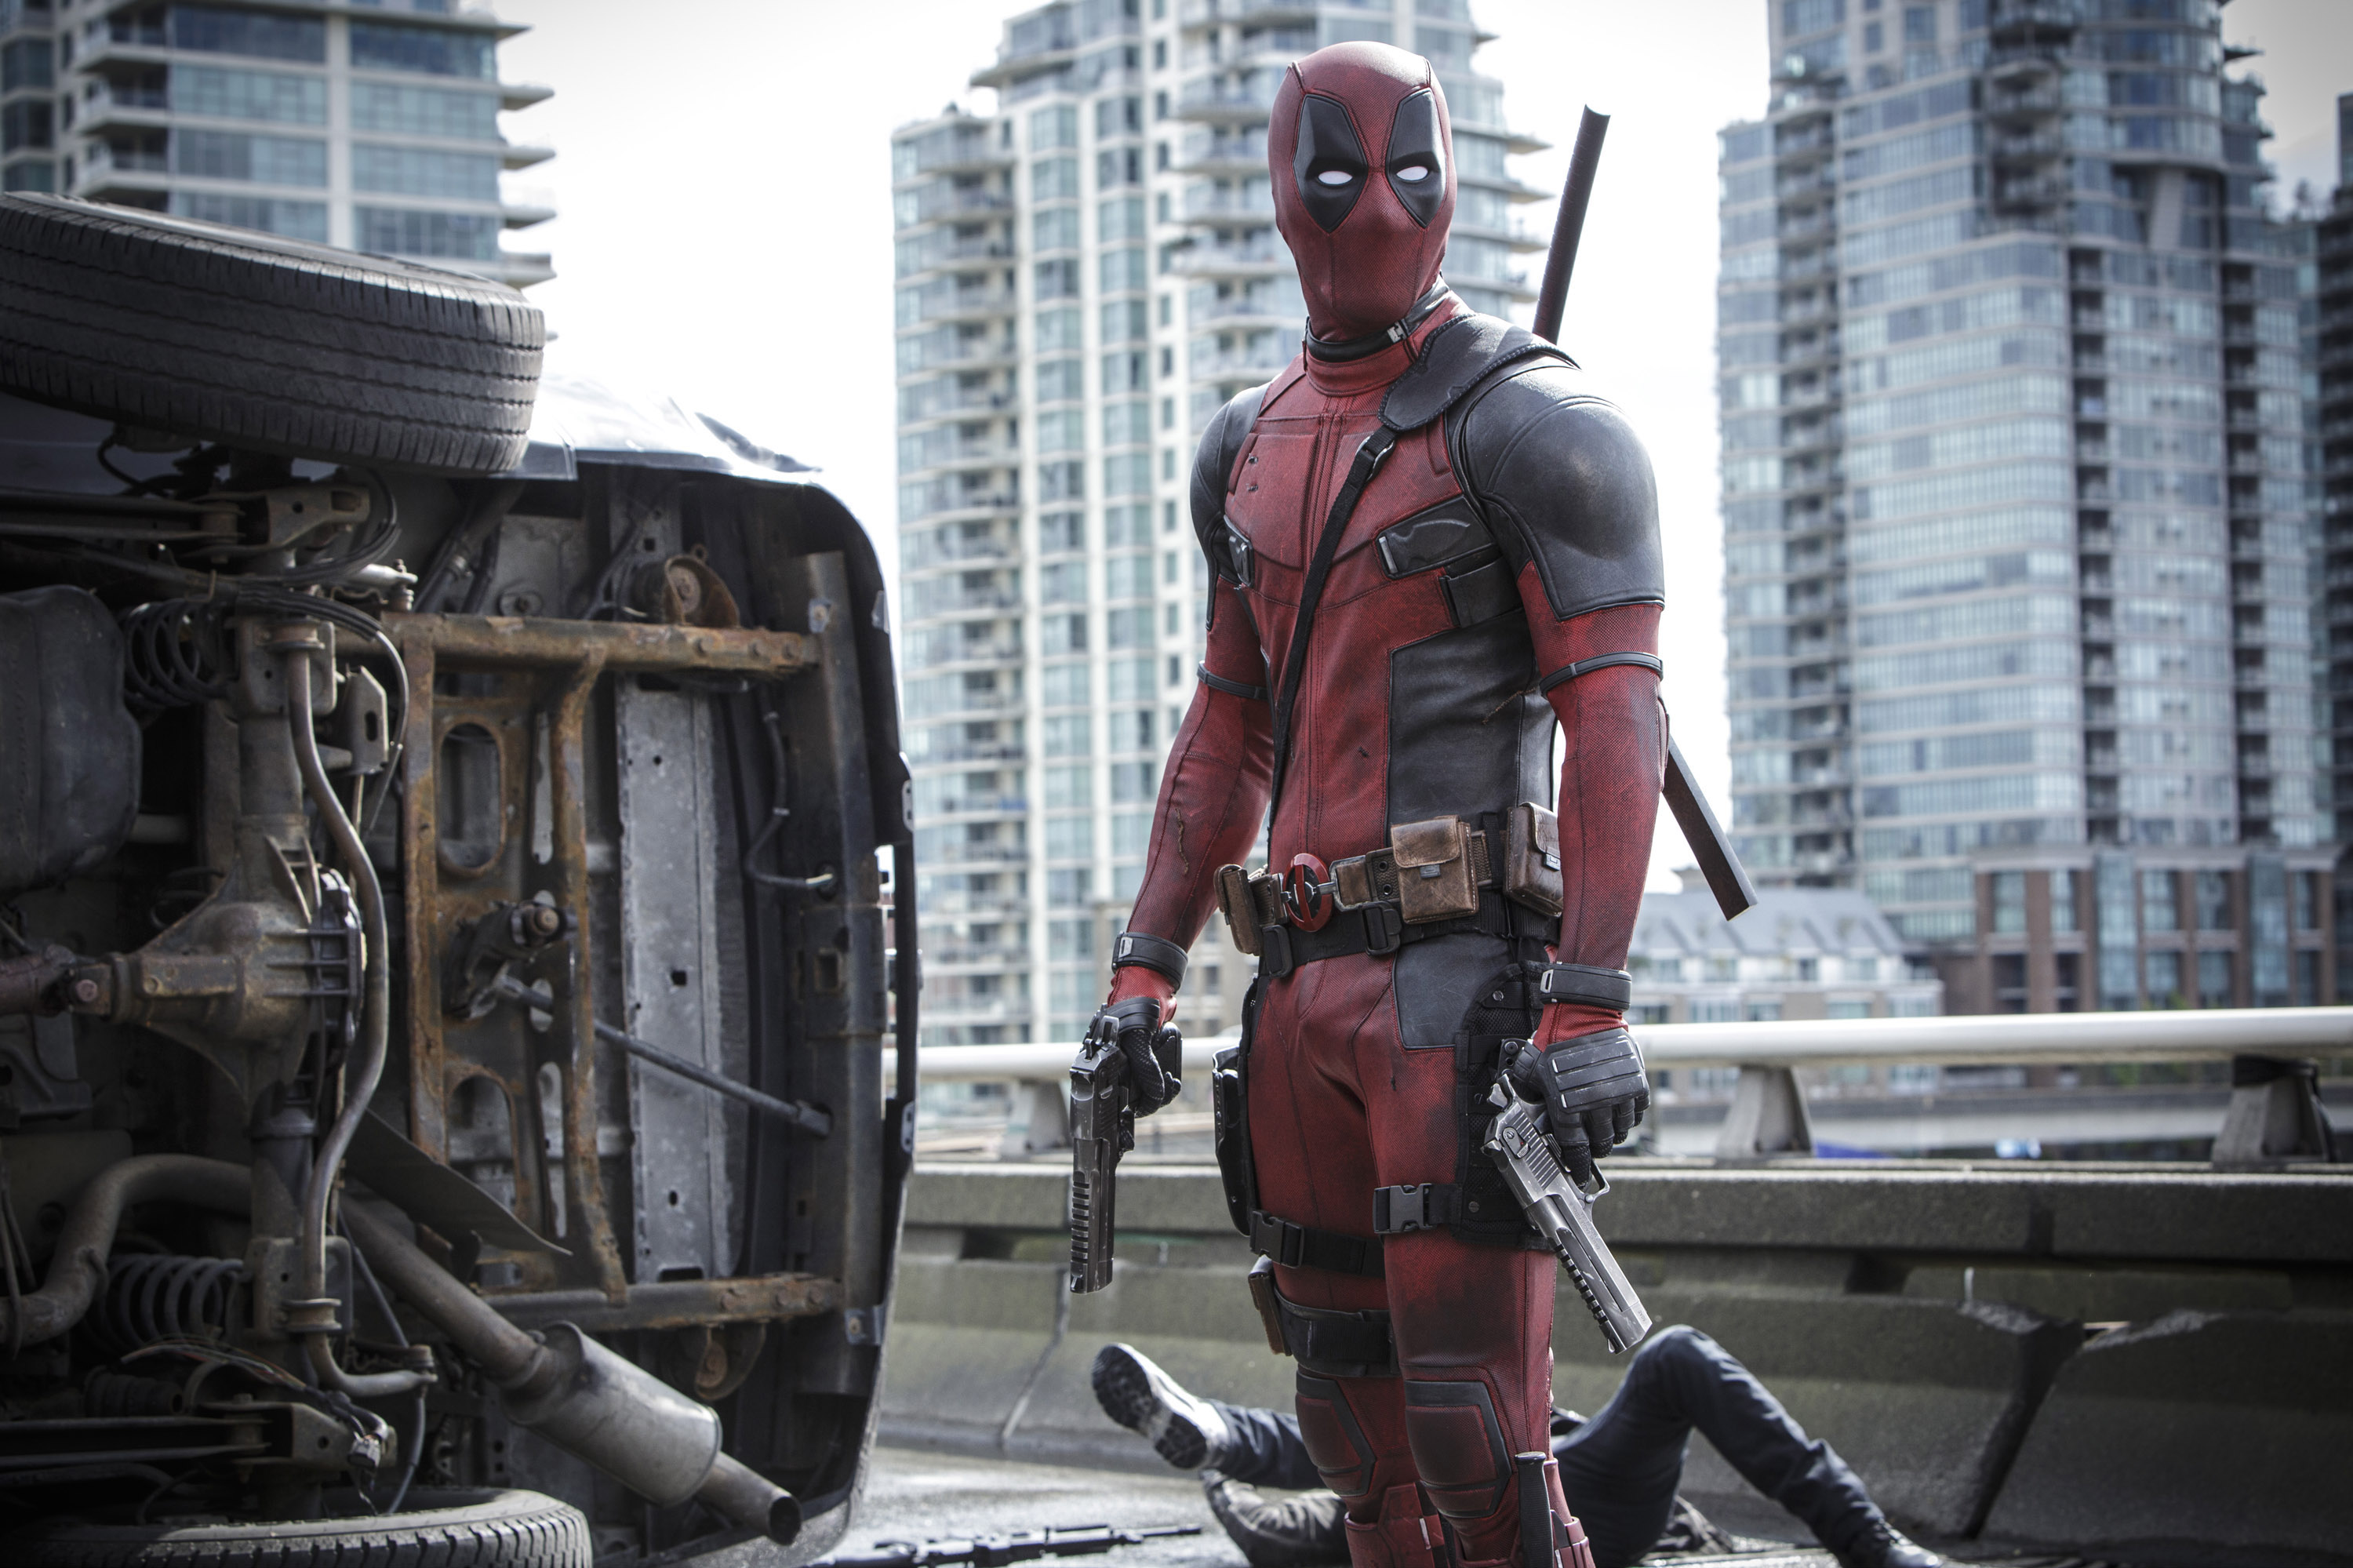 Ryan Reynolds is on(to) something in even-more-NSFW tailer for ‘Deadpool’